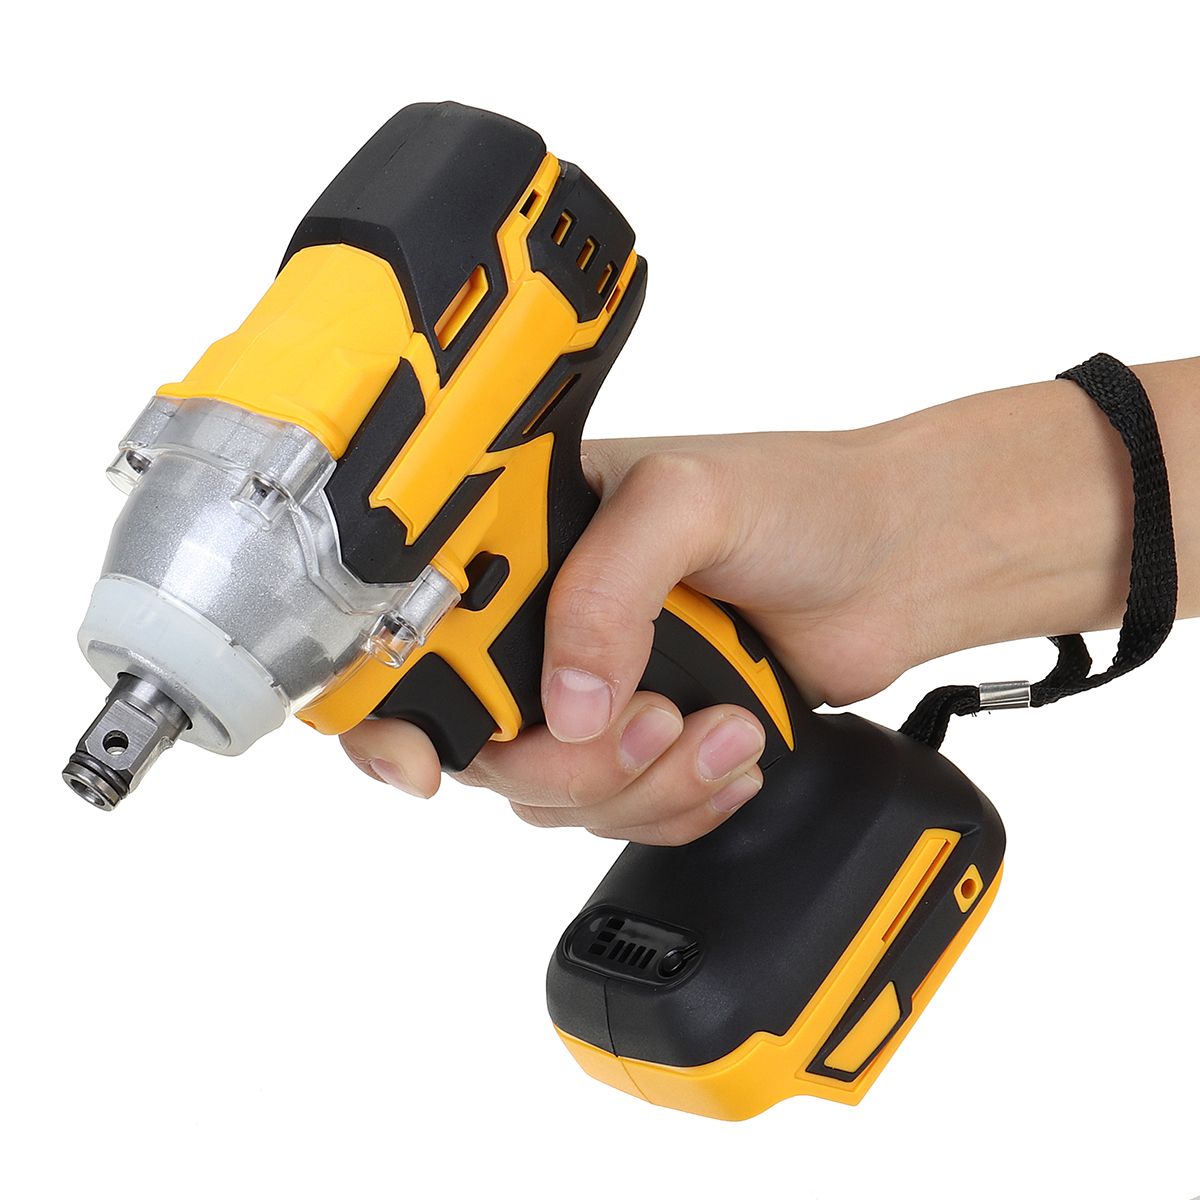 12Inch-18V-520Nm-Cordless-Impact-Wrench-Driver-Brushless-Motor-Stepless-Speed-Electric-Wrench-Adapte-1602646